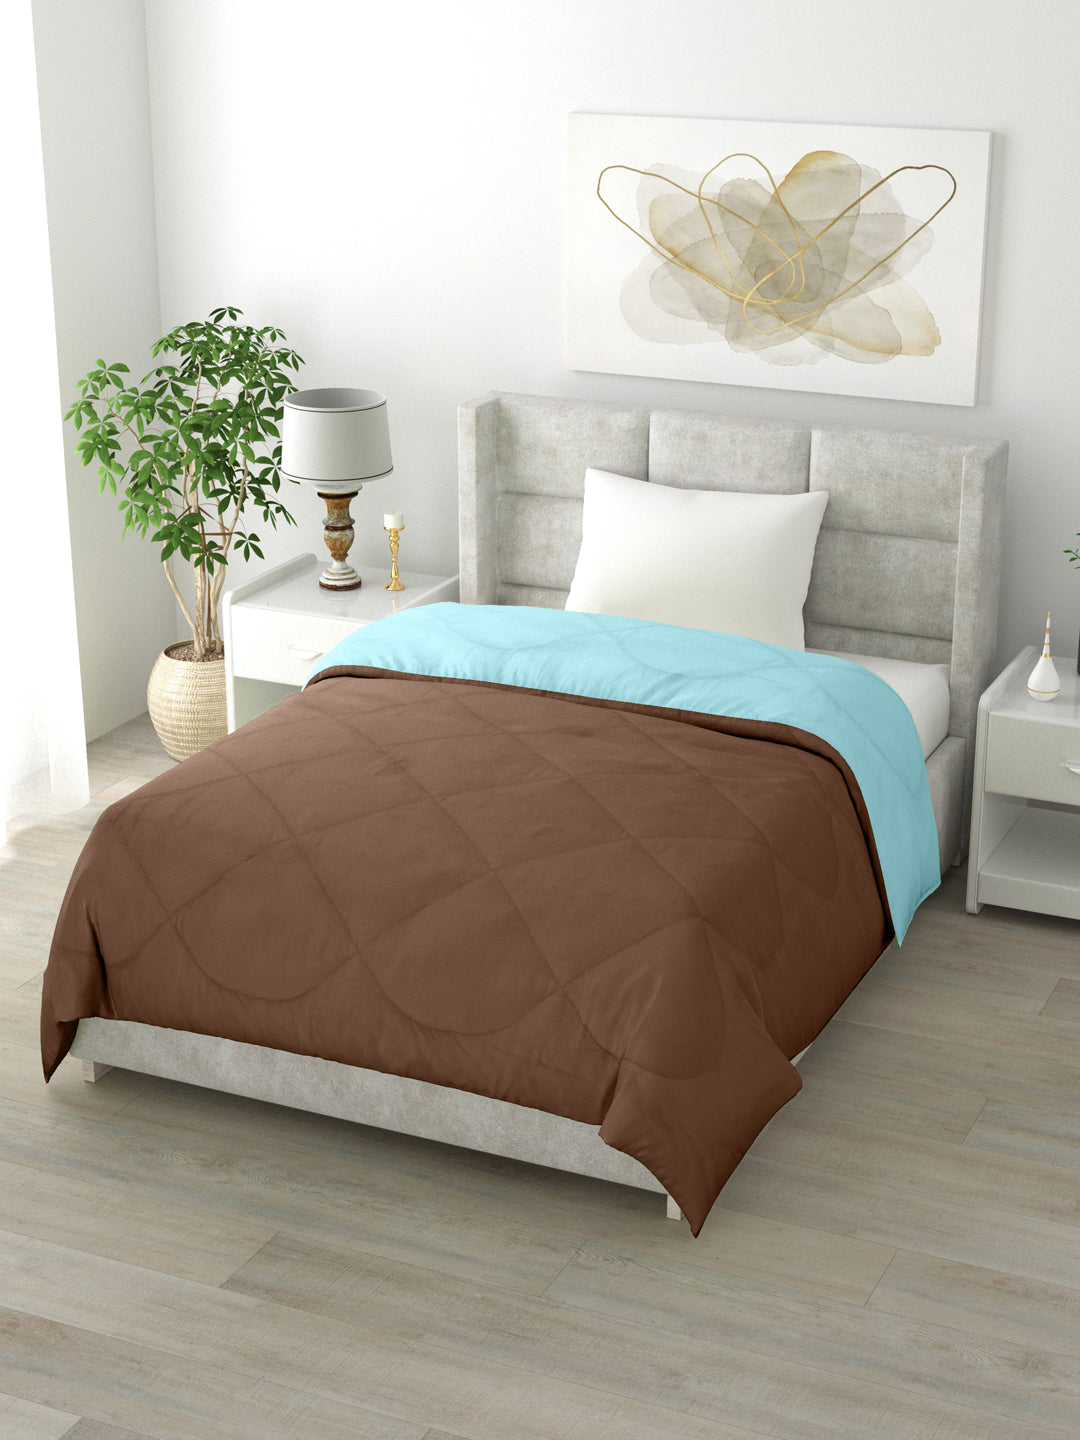 Reversible Single Bed Comforter 200 GSM 60x90 Inches (Aqua Blue & Brown)